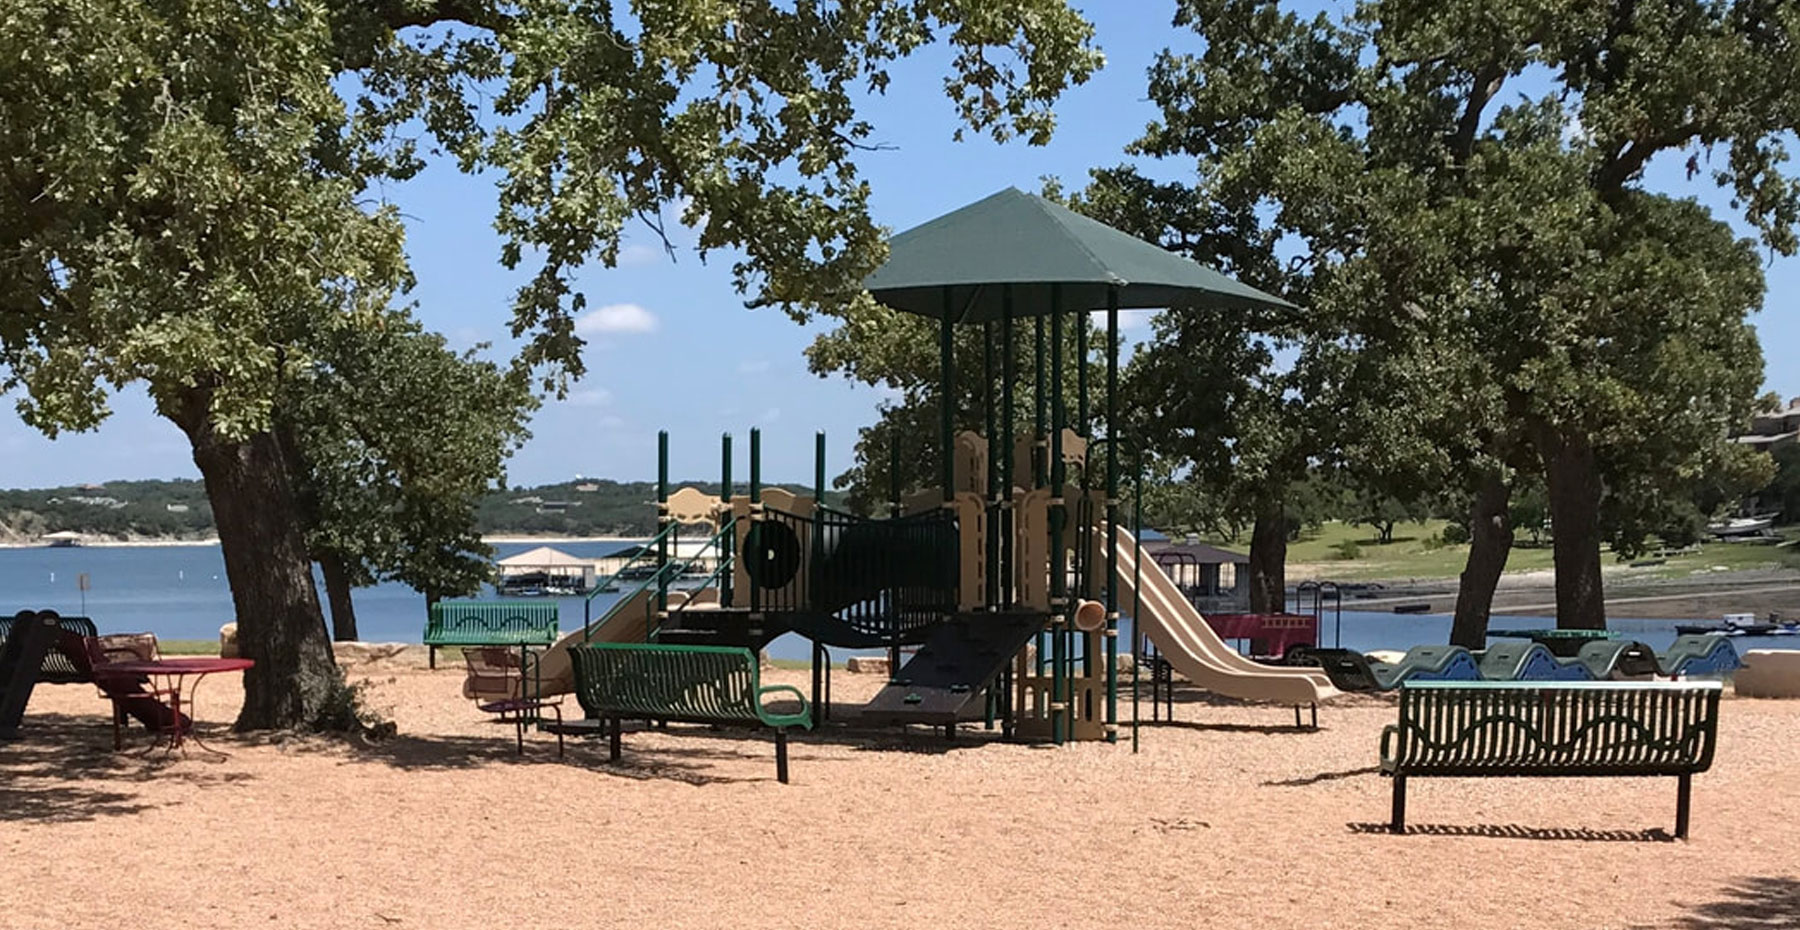 A park on the lake in point Venture, TX where Silverton Custom Homes builds